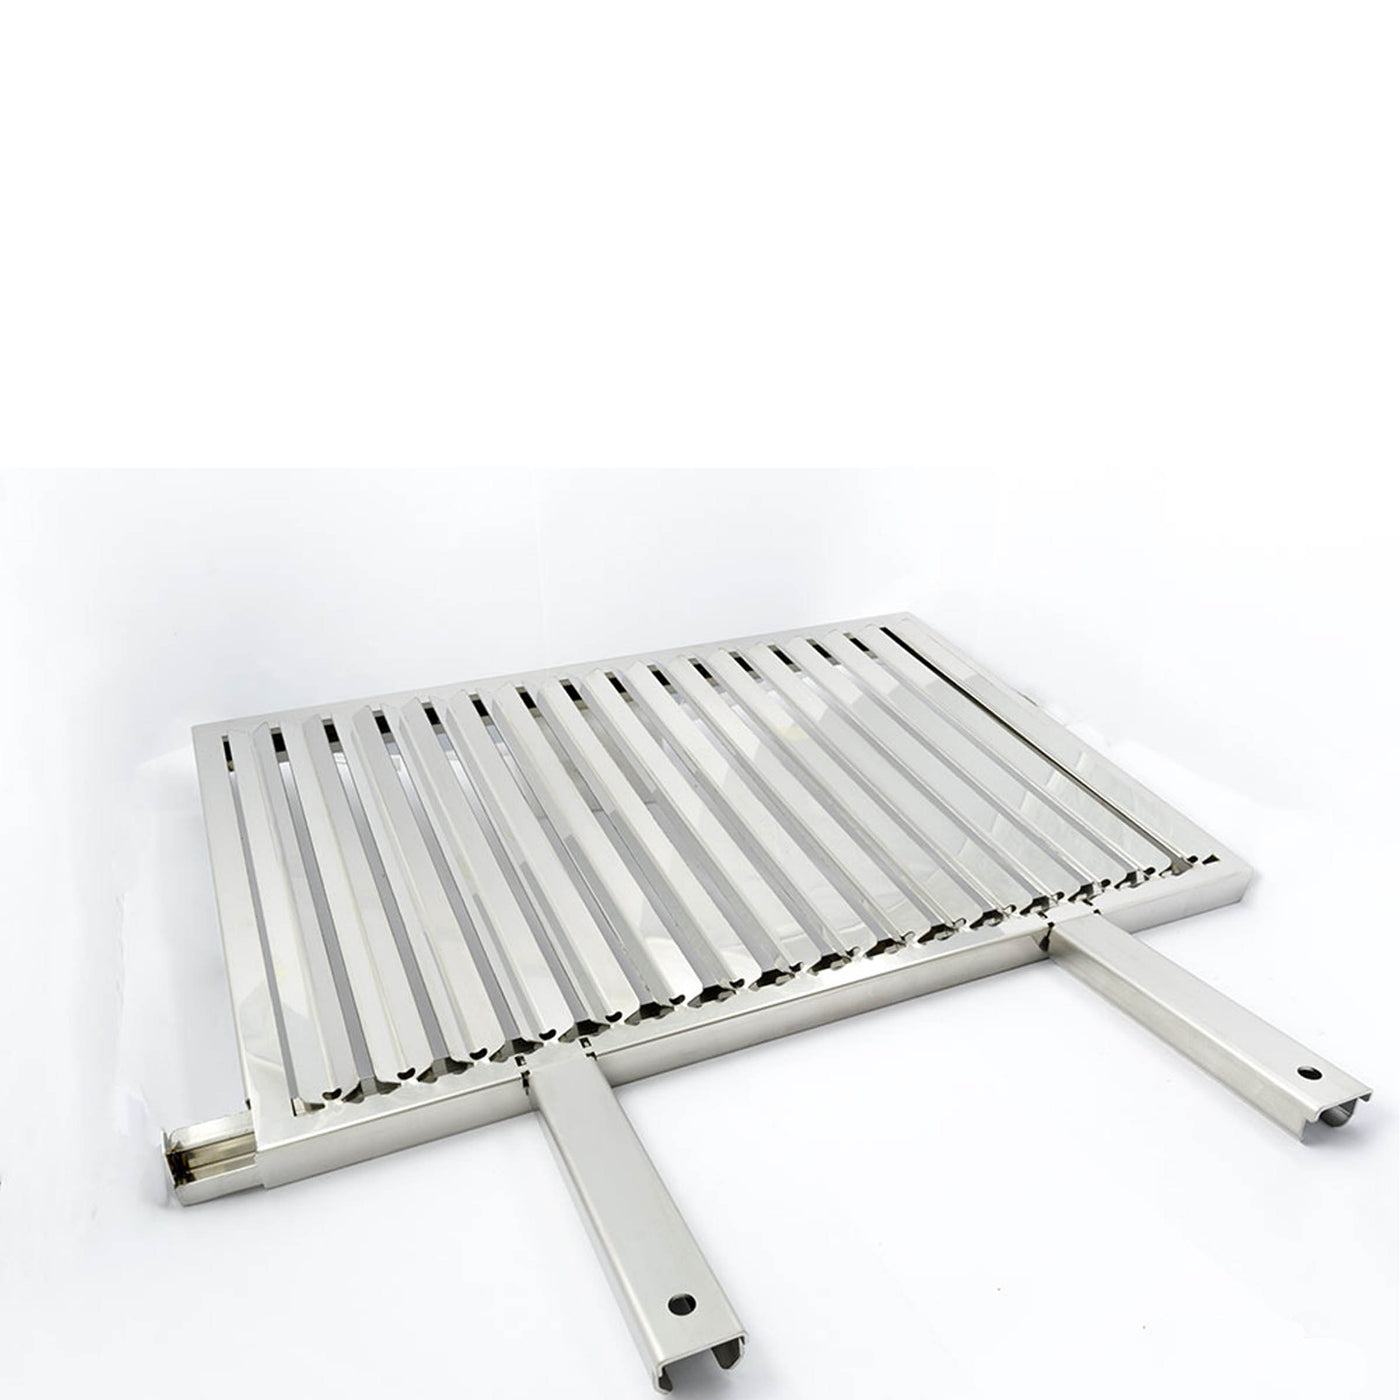 Stainless Steel Grill Grease Tray GRIGLIA GRASSO by LISA 03